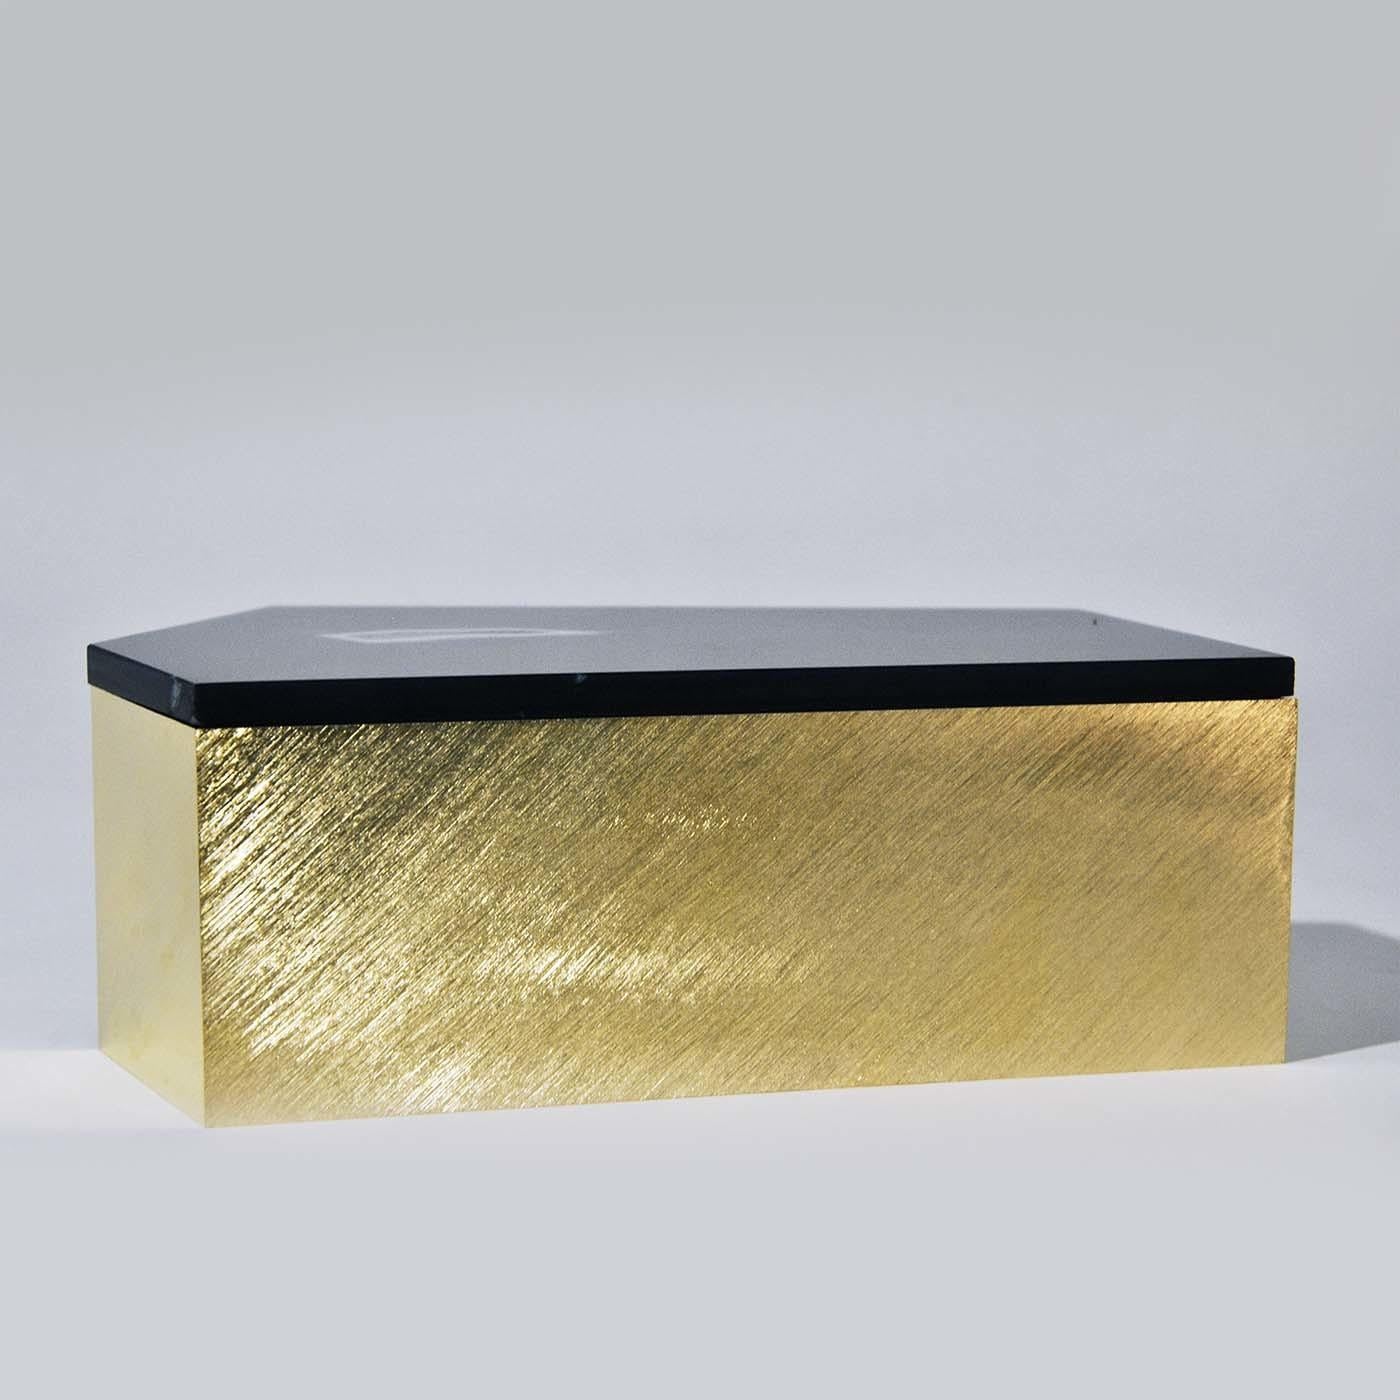 This distinctive, pentagonal box features a brushed gold-plated brass frame and a striking lid fashioned of a black agate stone. The metallic luster of the brass box highlights the natural richness of the agate's deep blue color, infusing the work